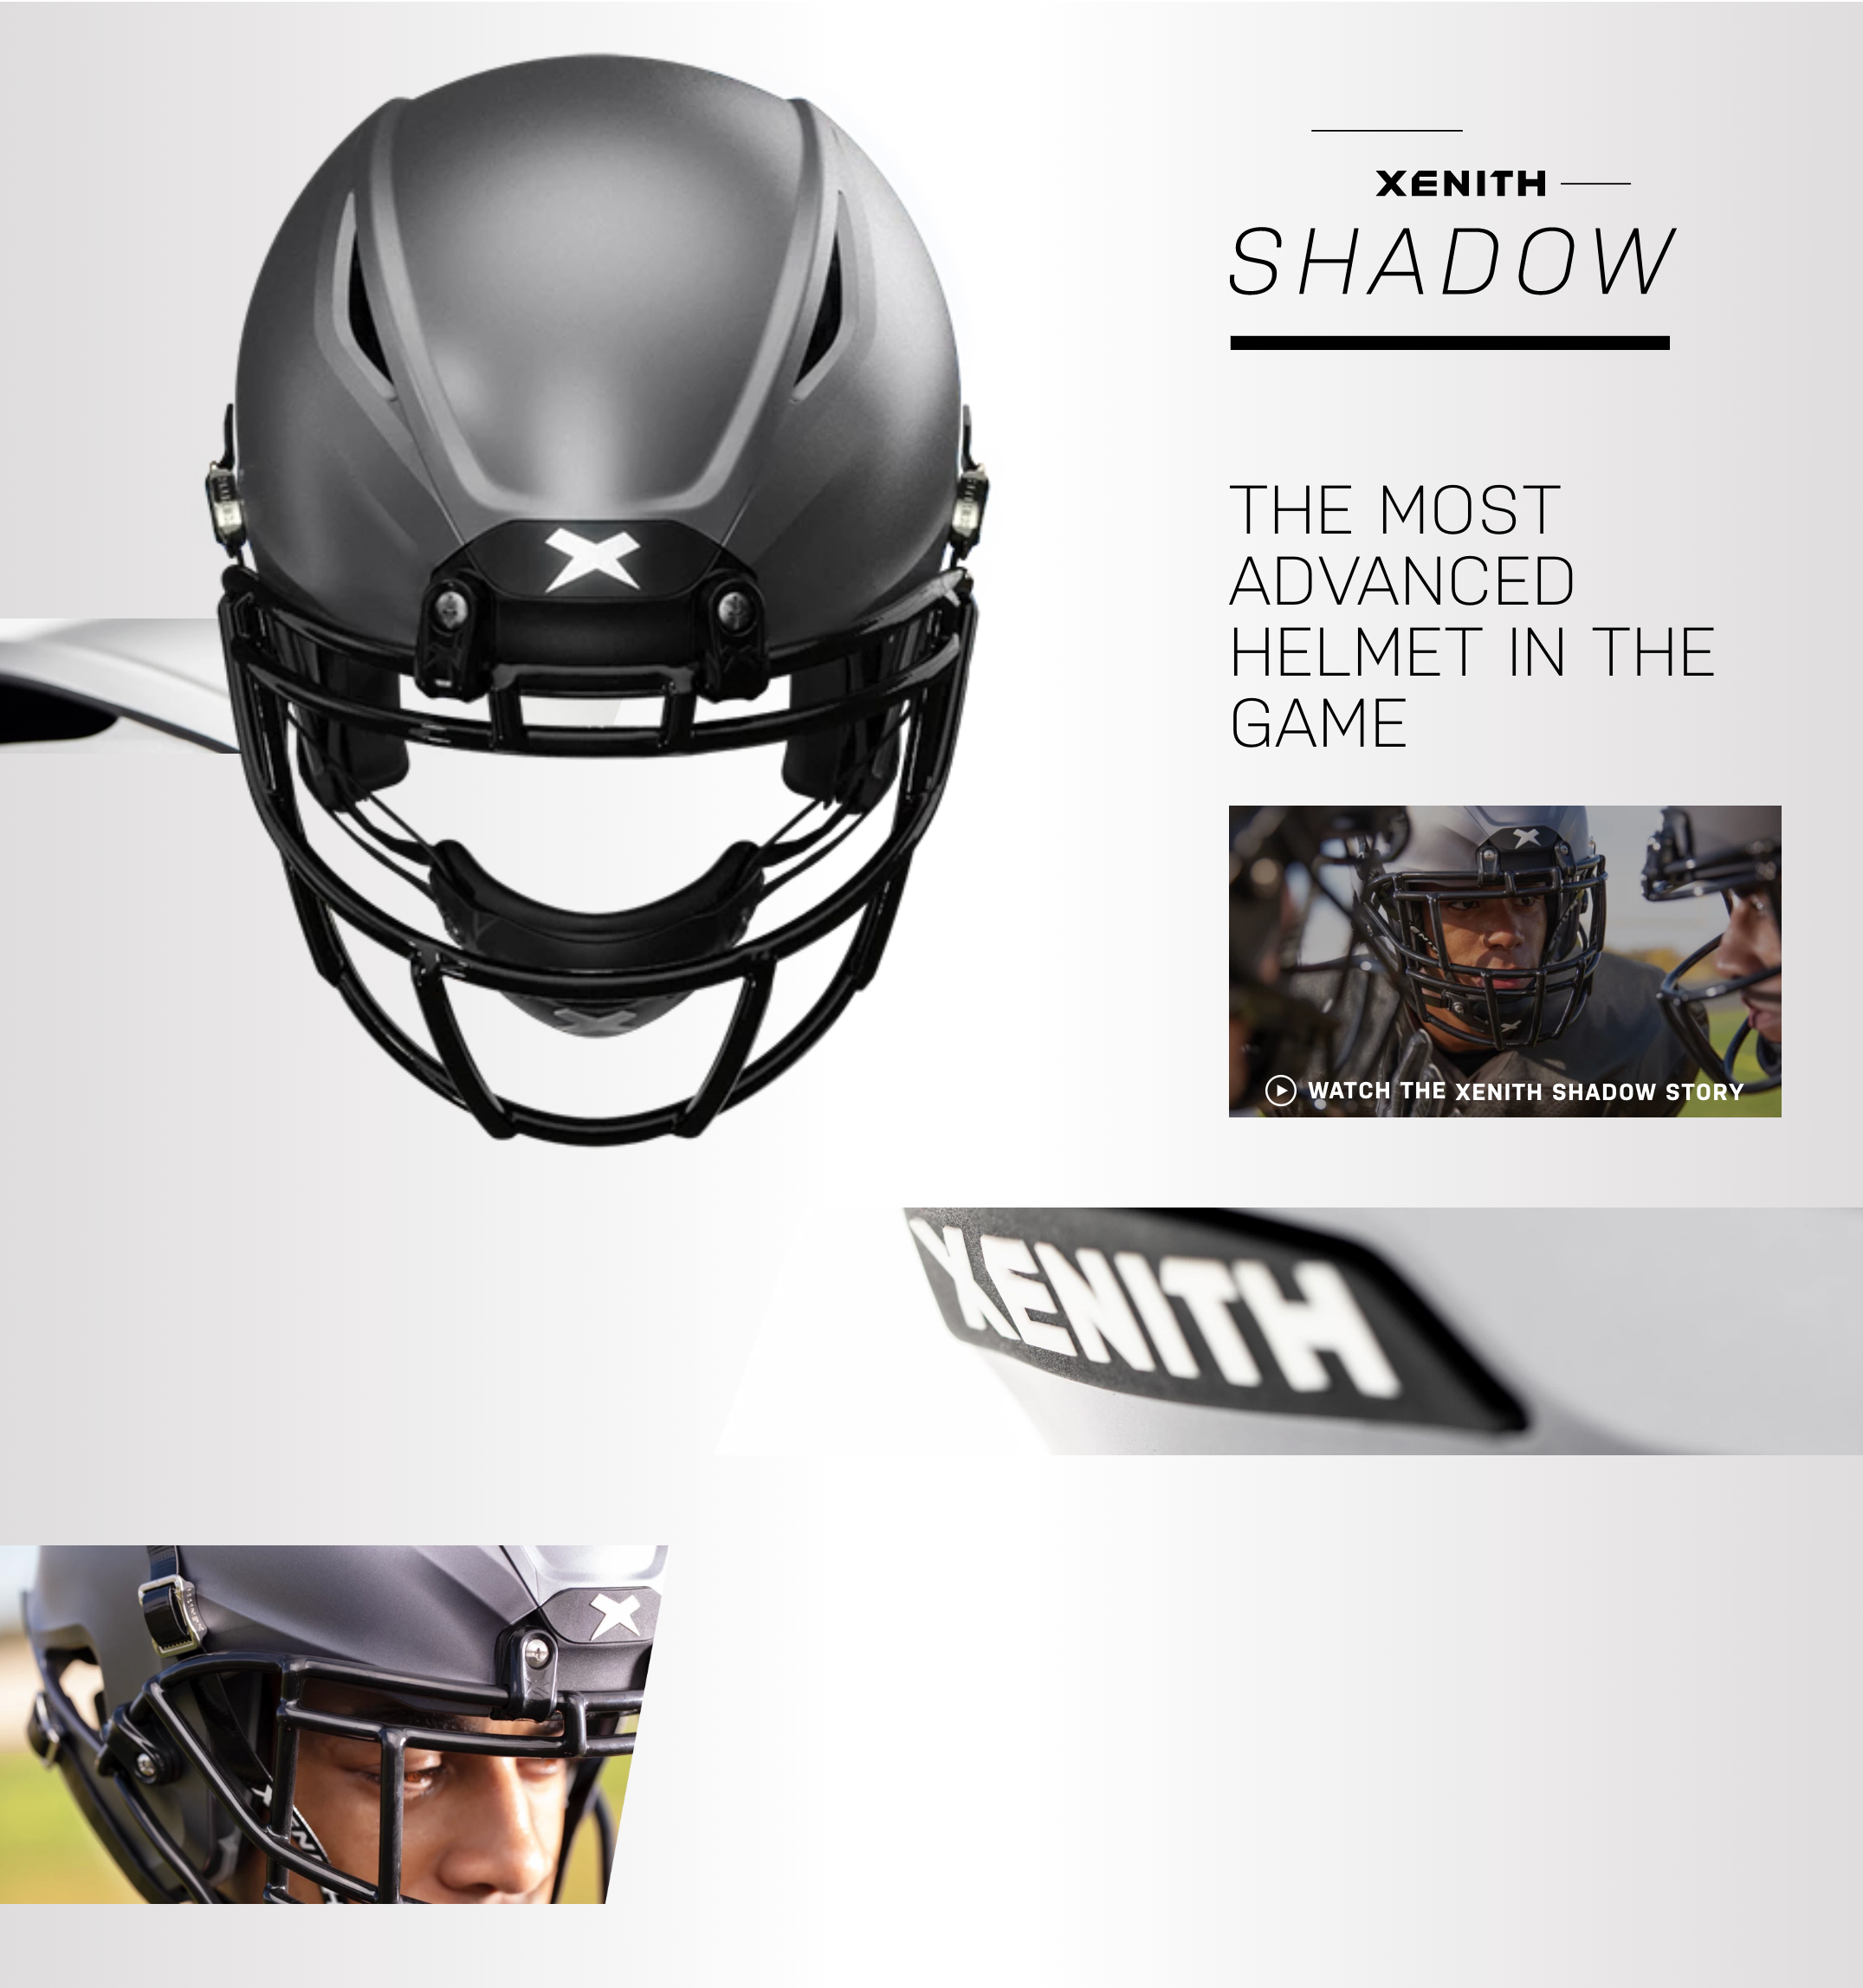 Xenith Shadow Microsite Landing Page